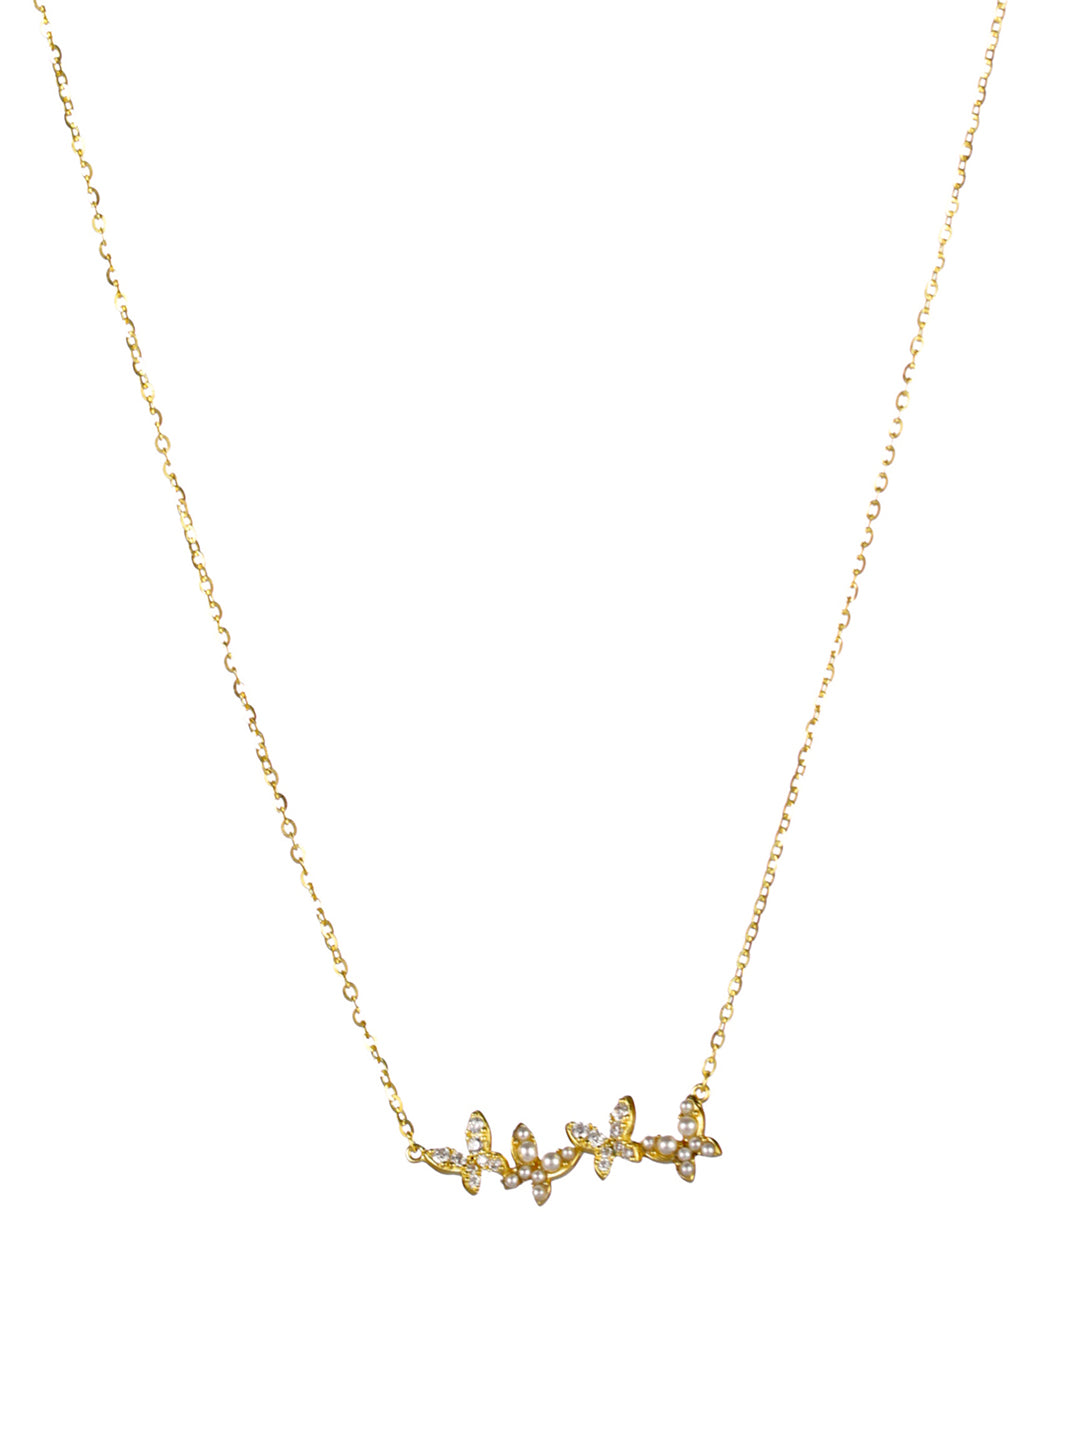 Sheer by Priyaasi Pretty Butterflies Gold-Plated Sterling Silver Necklace